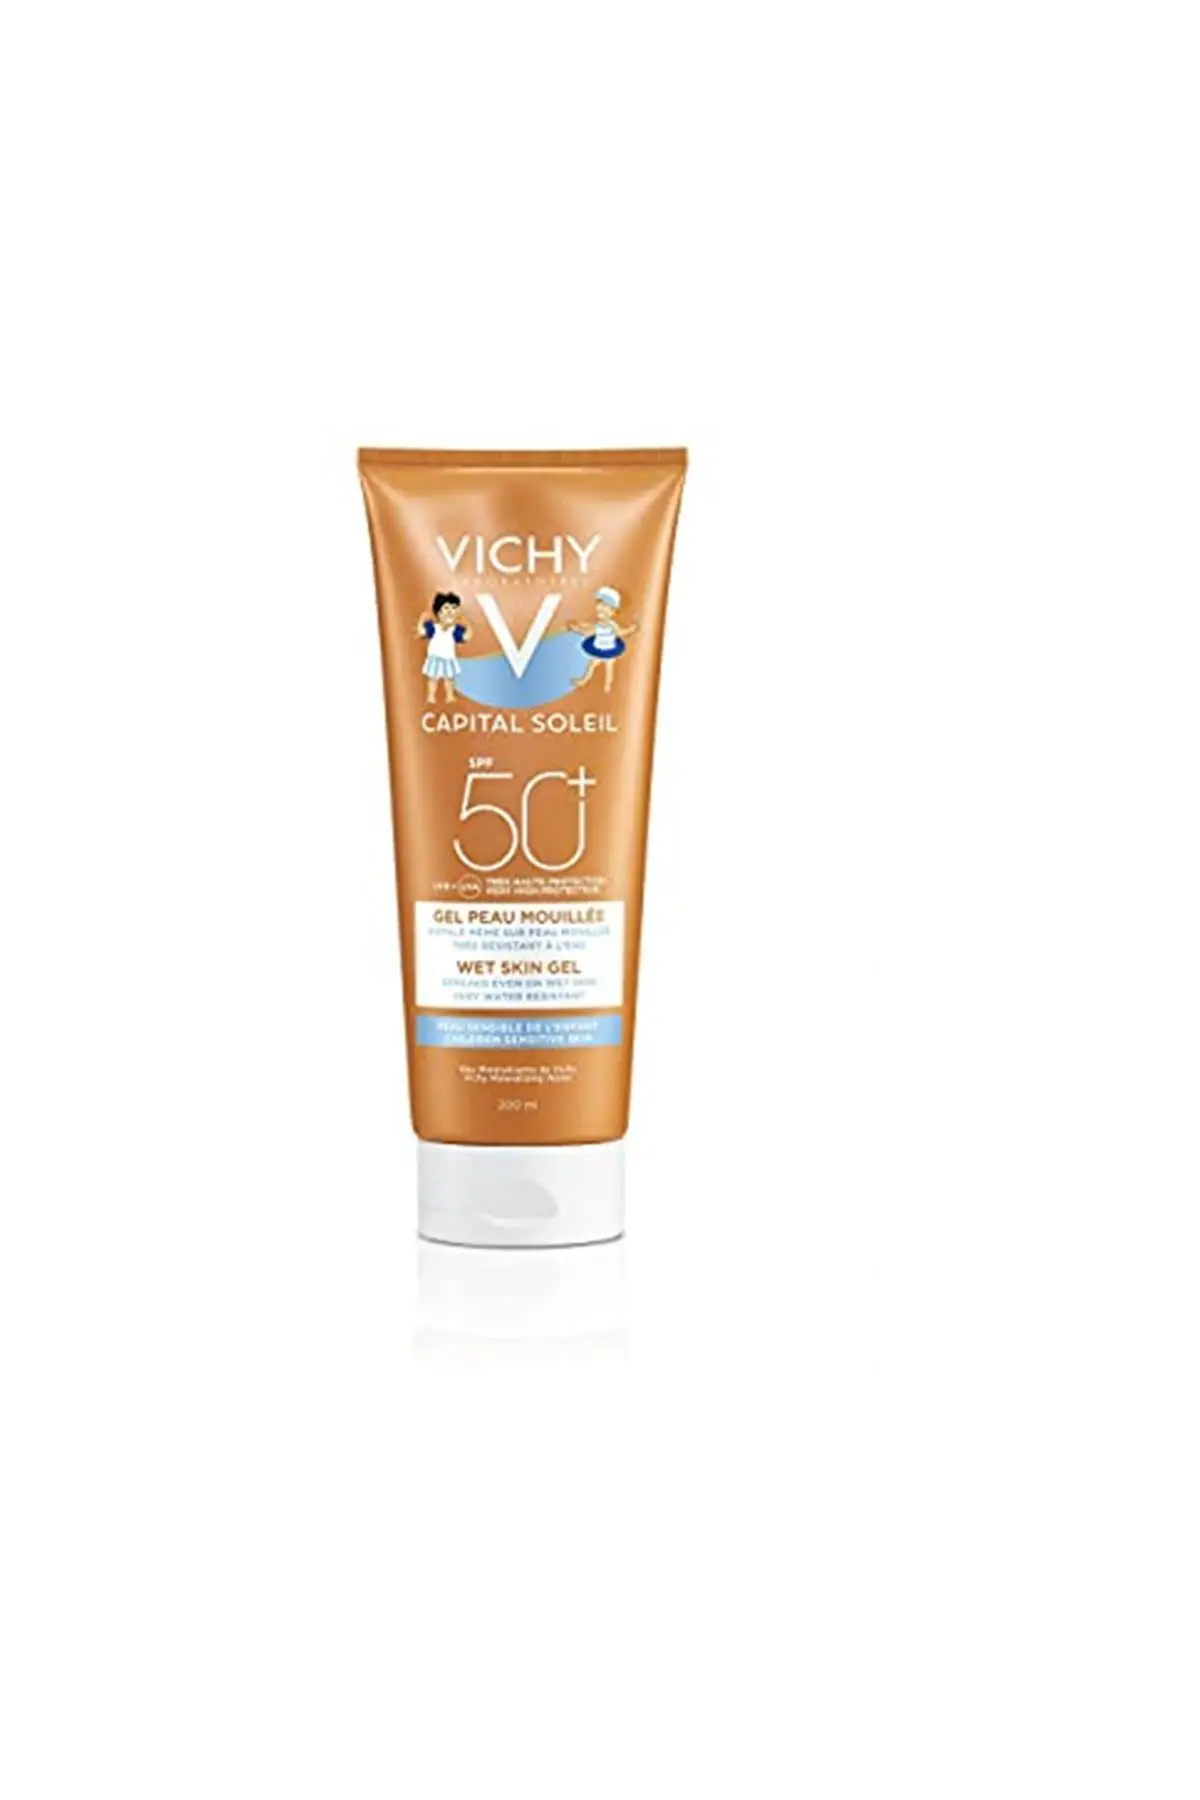 

Brand: Vichy Capital Soleil Wet Skin Gel For Children High Protected Face And Body Milk Spf 50